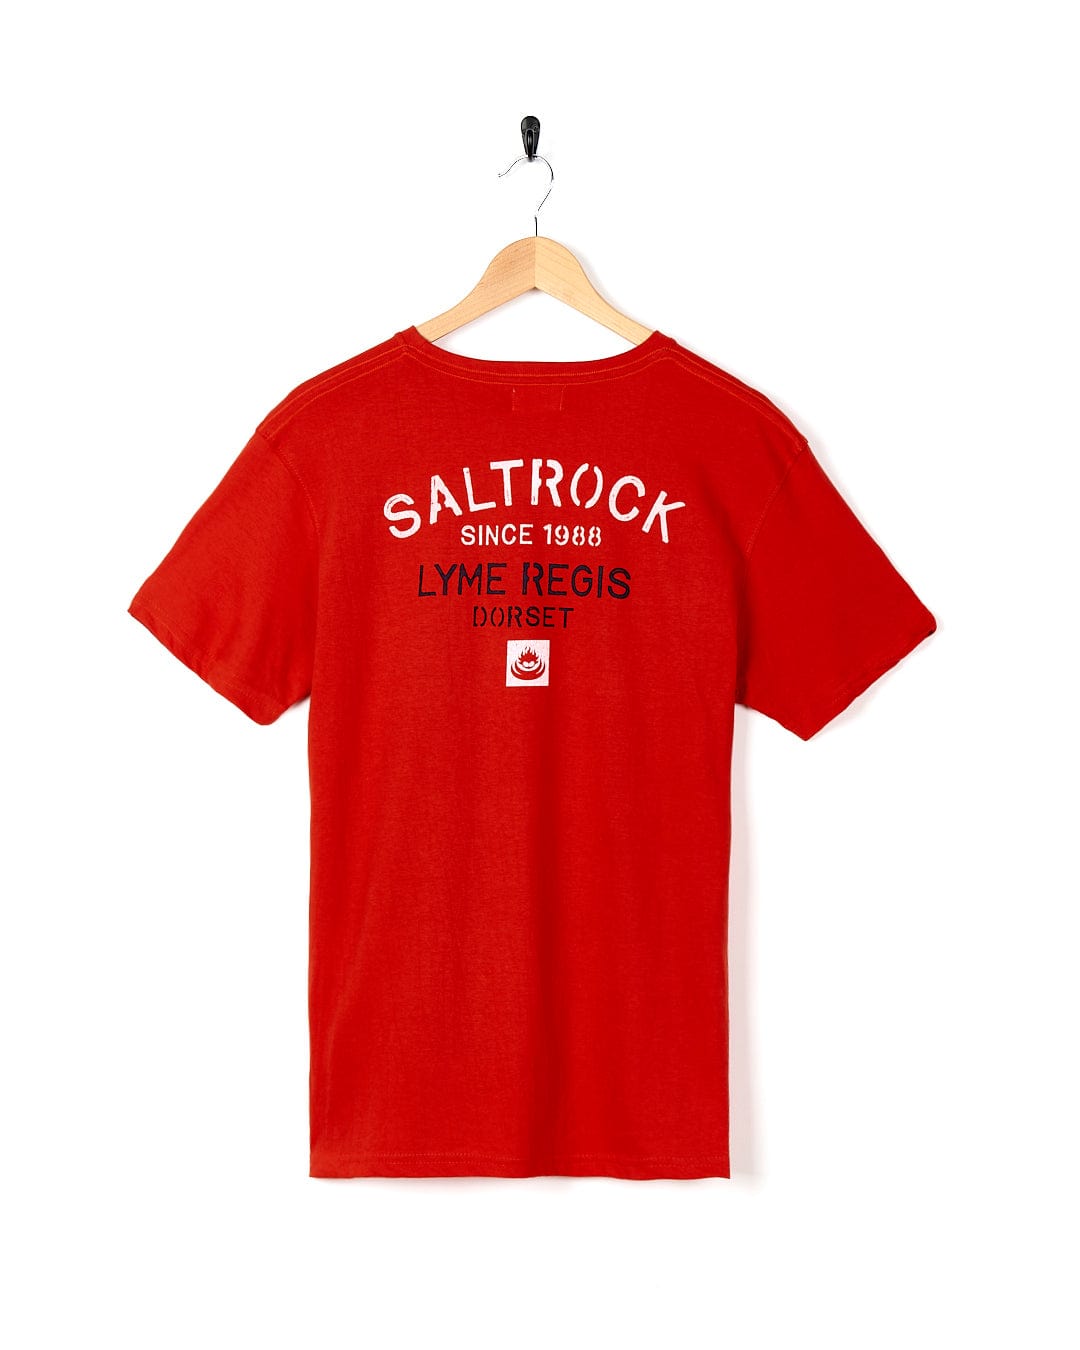 A Stencil - Mens Lyme Regis Location T-Shirt - Red with the brand name Saltrock on it.